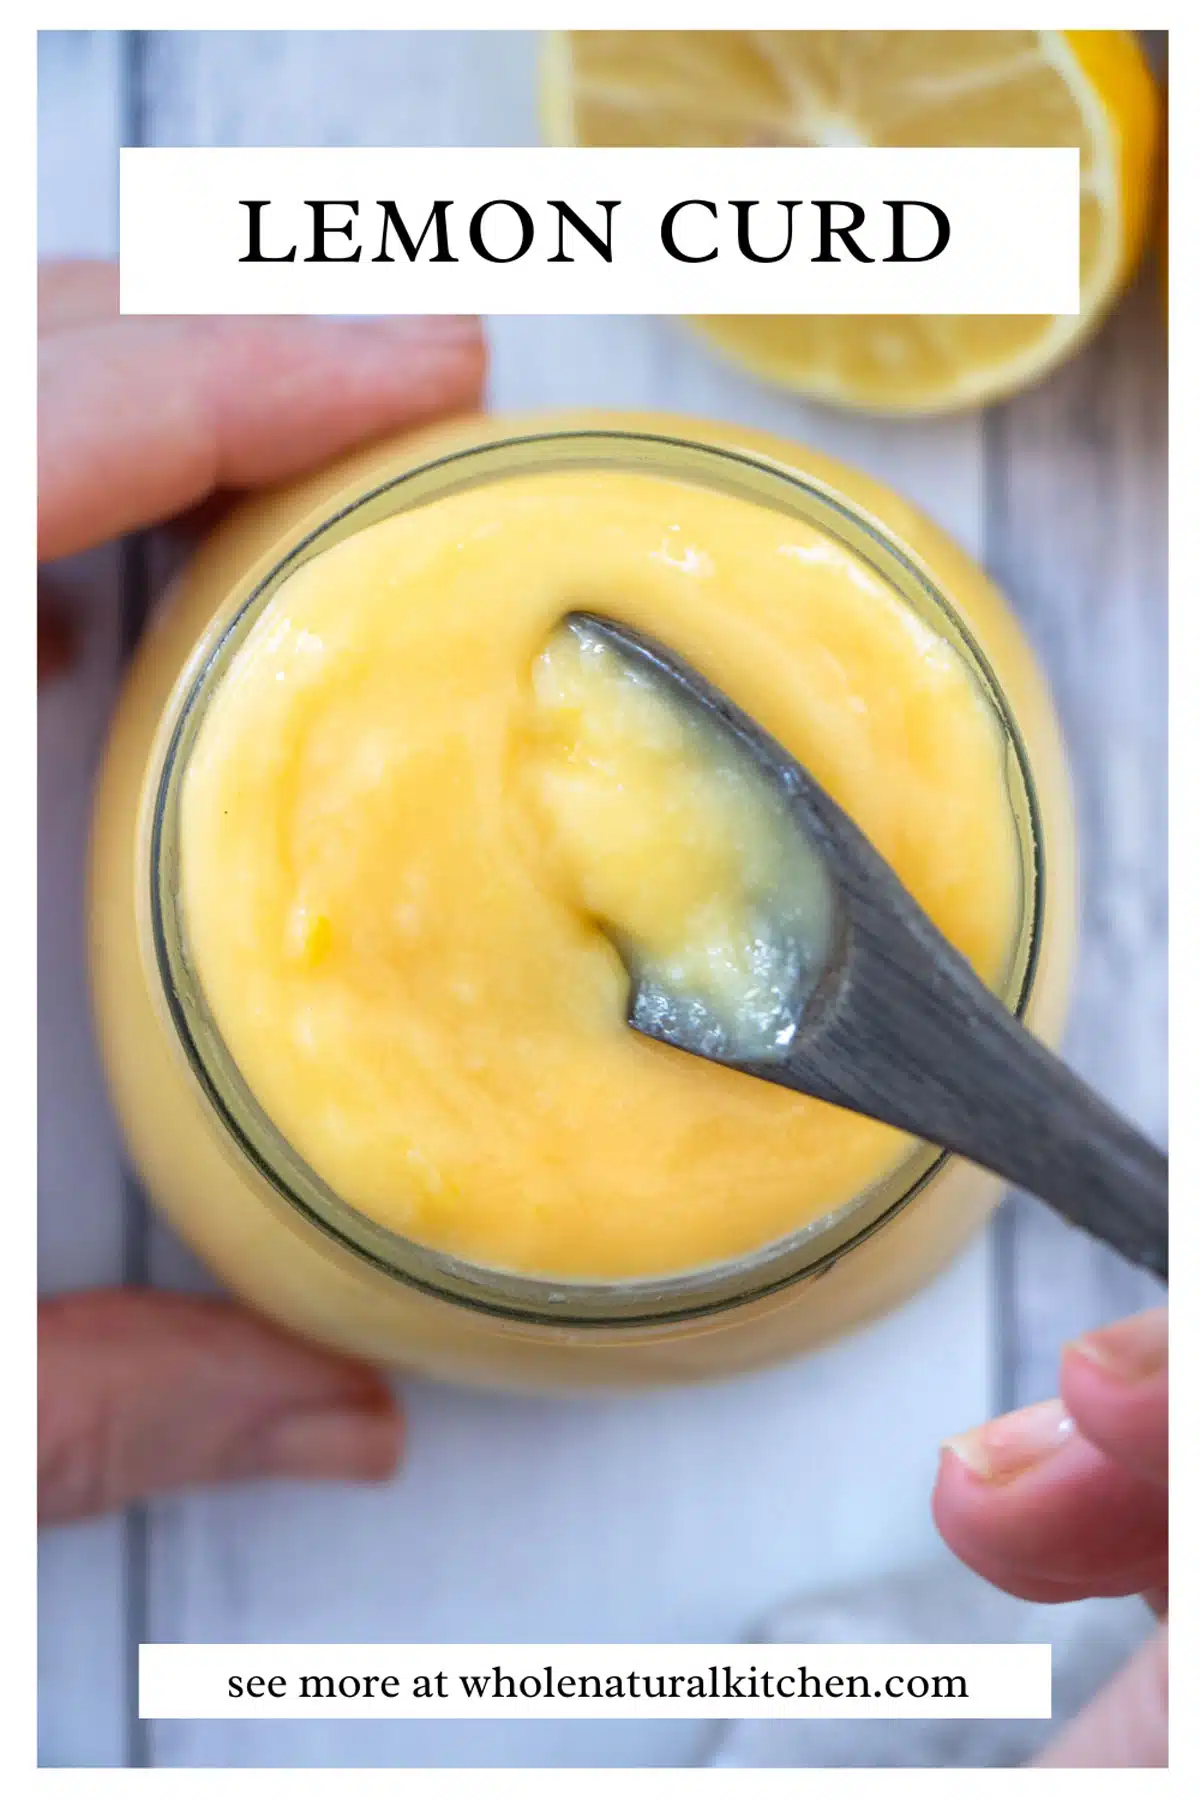 An image of a pinterest poster. The name of the recipe is at the top with a picture of the lemon curd in a small jar below it. The jar is being held by a white hand while another is dipping a small brown spoon in it to scoop some up. The website names is at the bottom of the image.